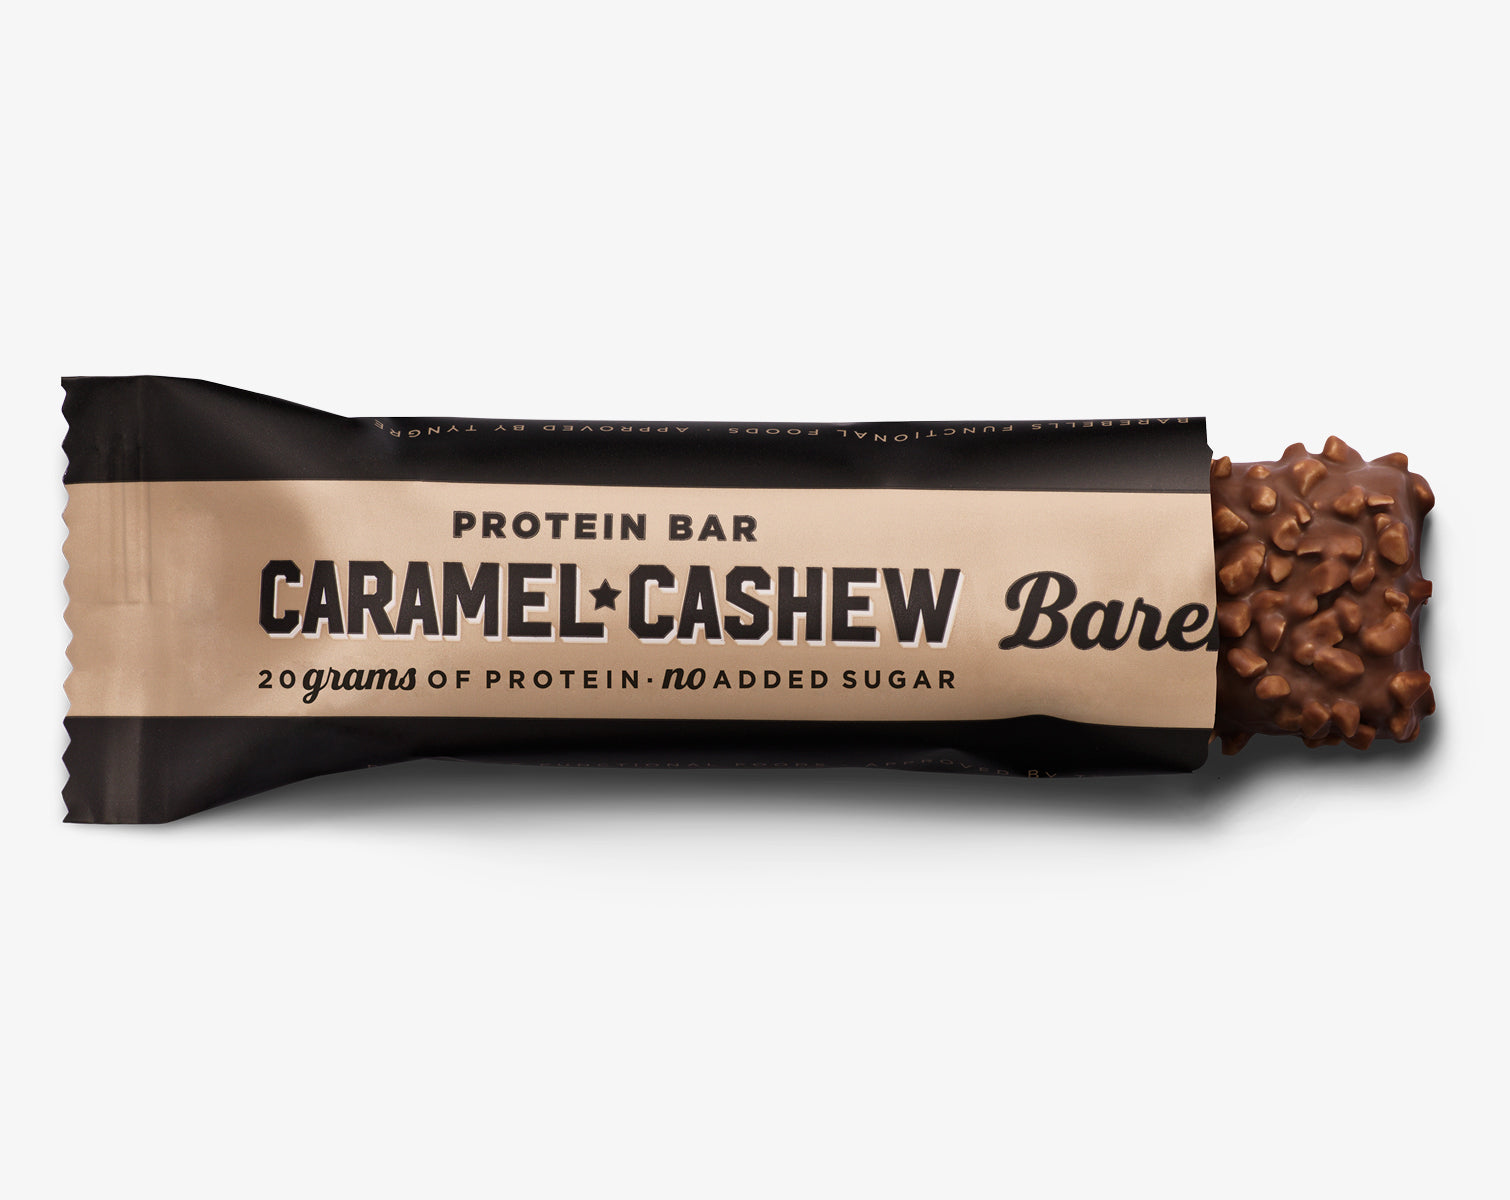 Barebells Protein Bar  Delicious and Nutritious